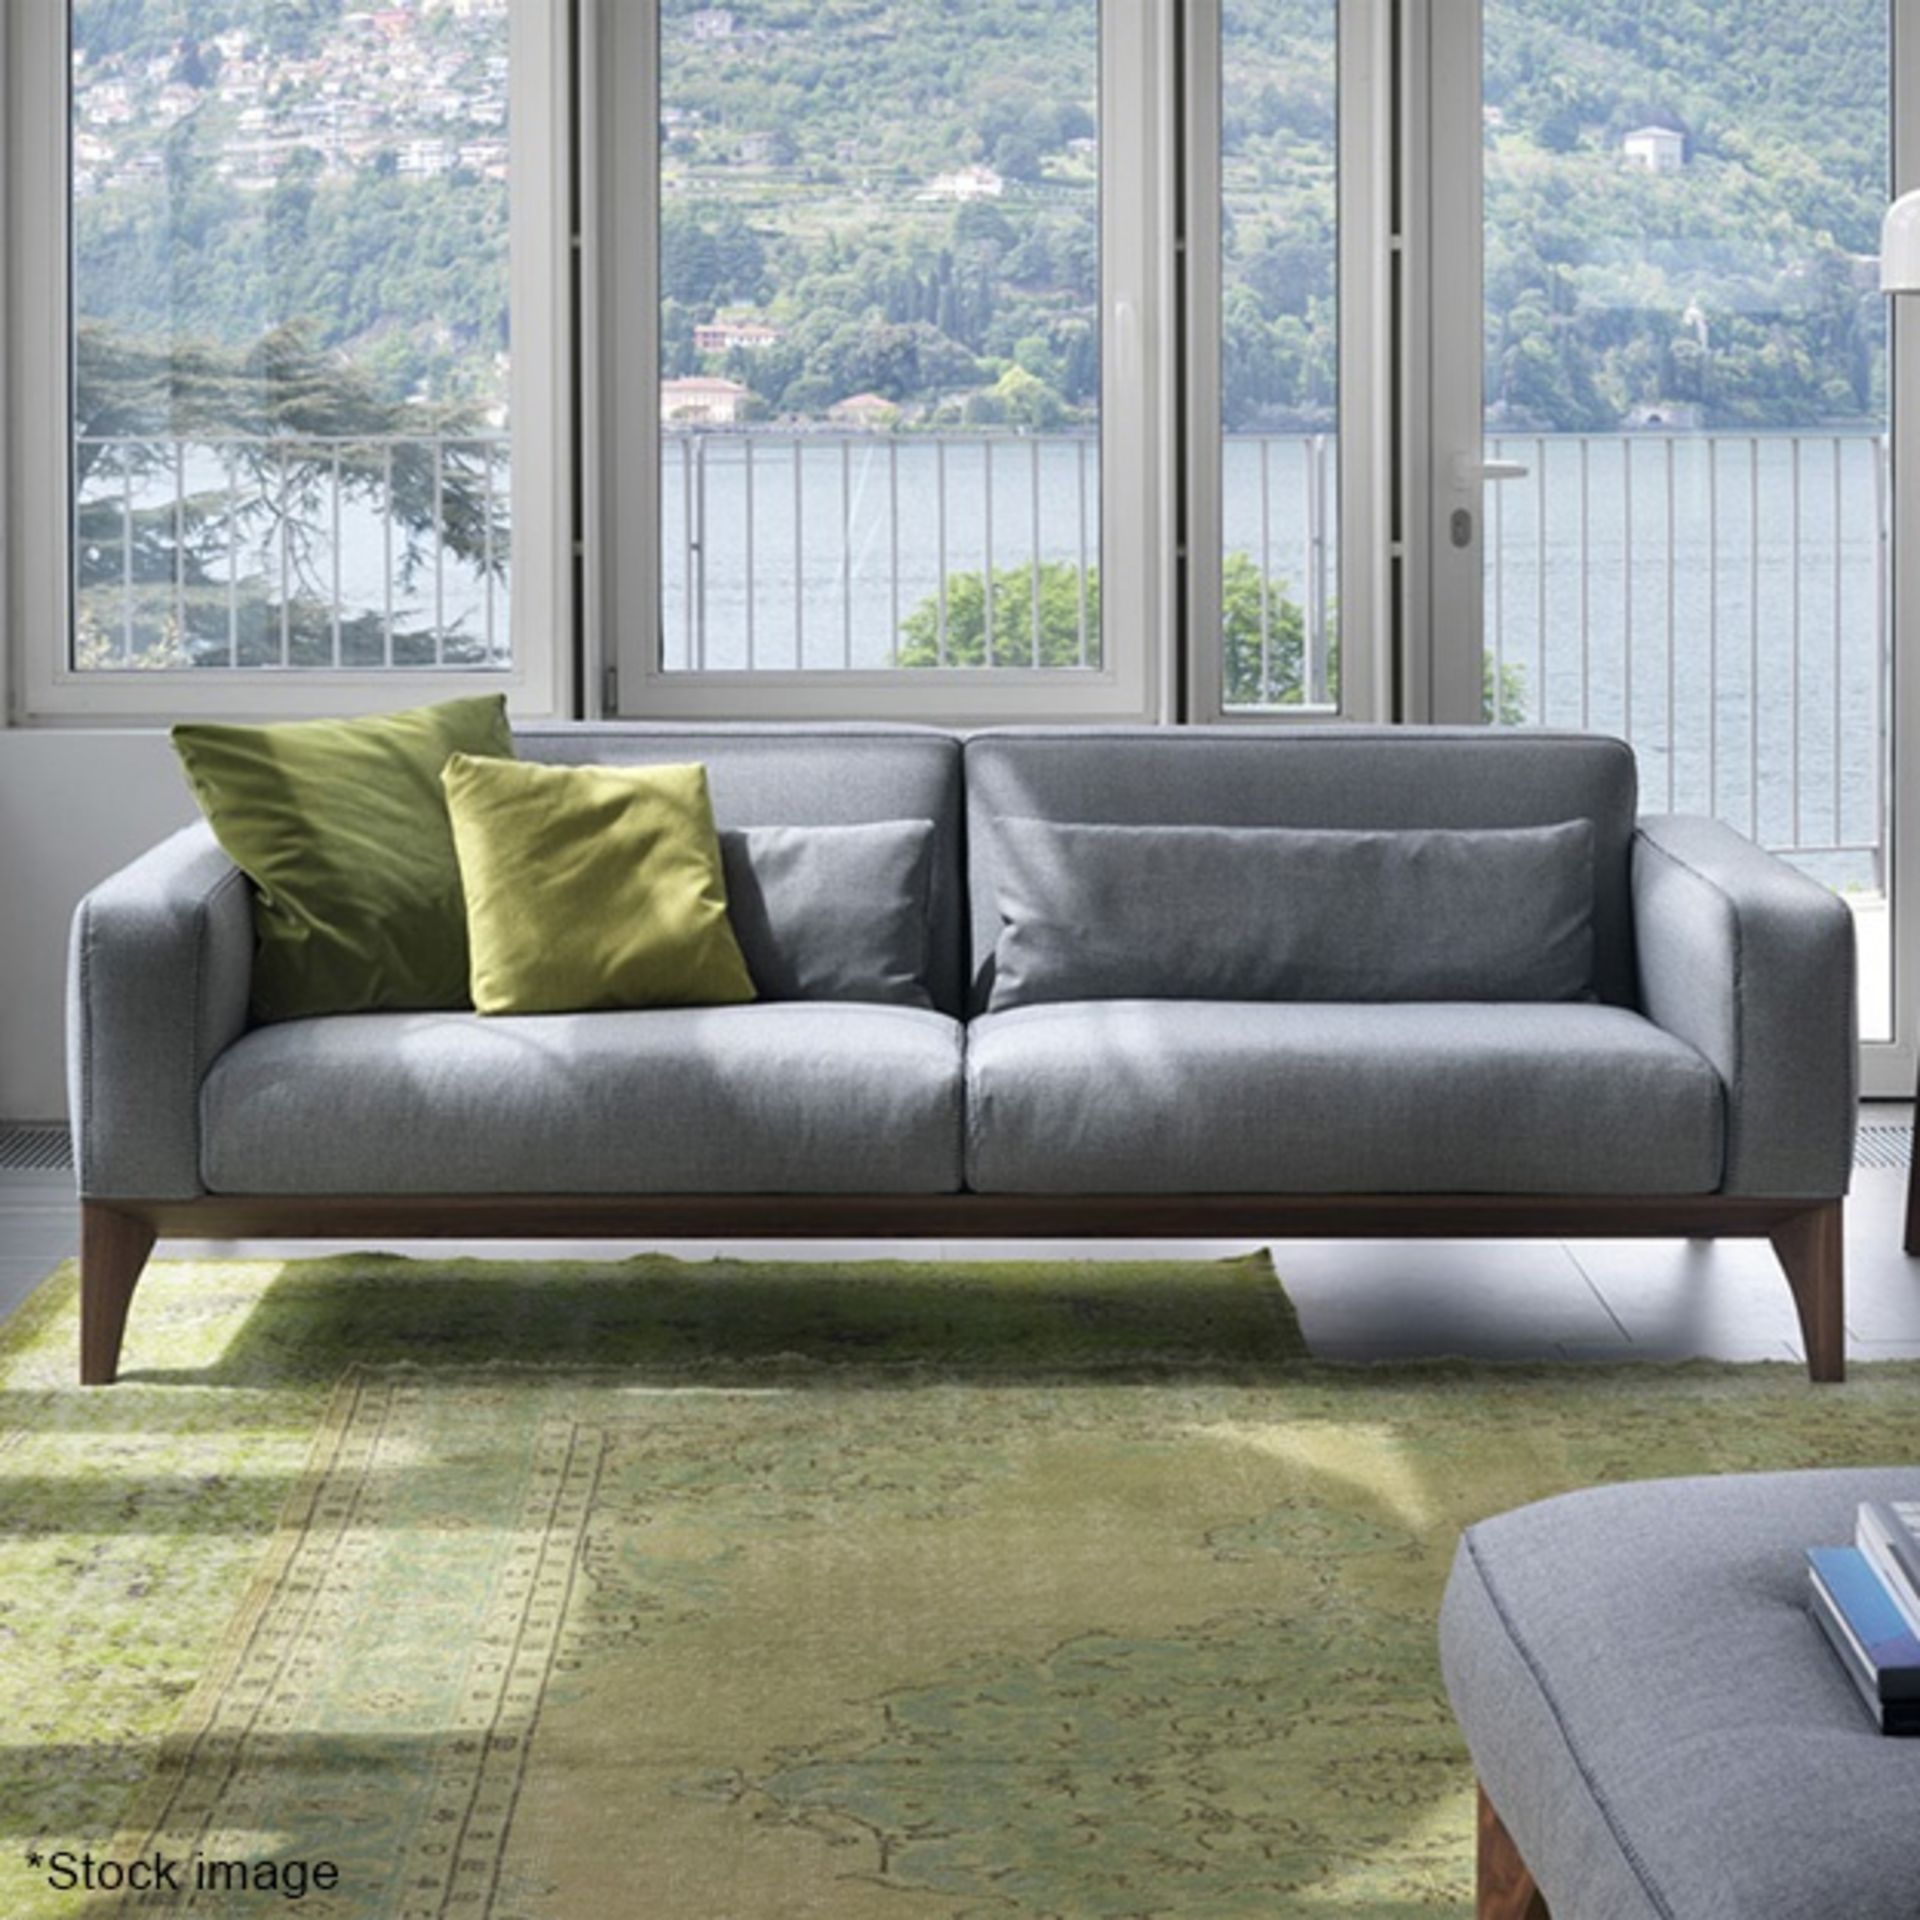 1 x PORADA 'Fellow' Designer Upholstered 2.2-Metre Sofa with a Canaletto Walnut Frame - RRP £7,450